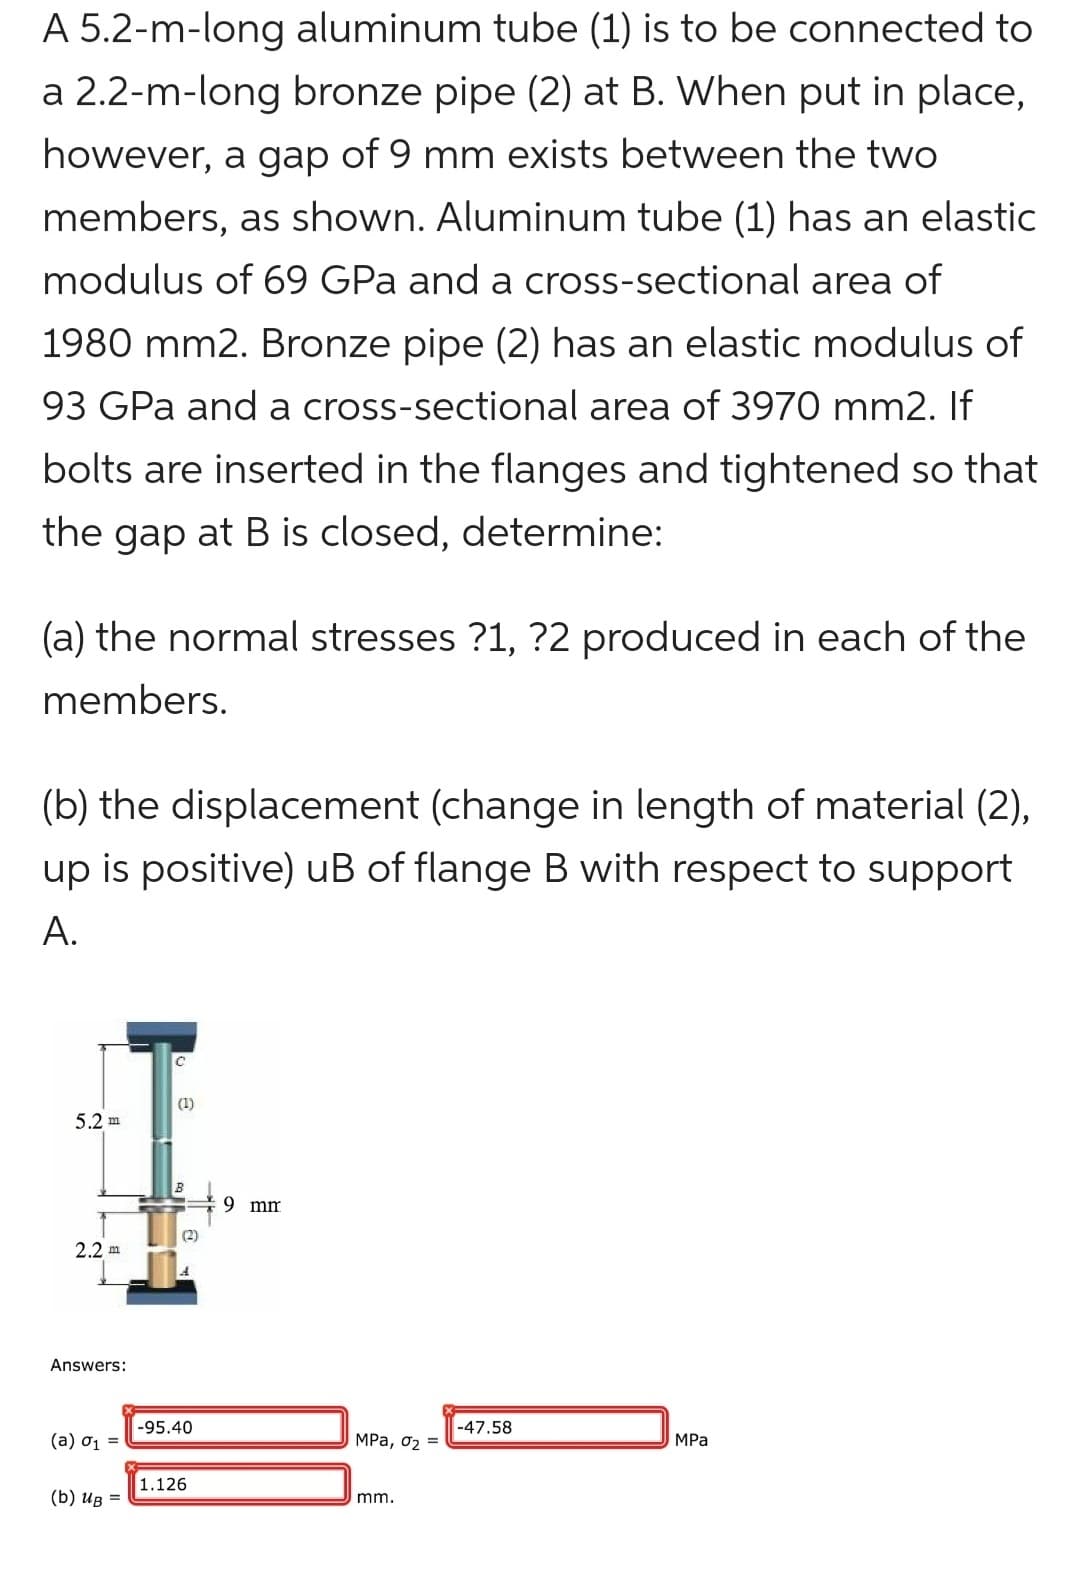 A 5.2-m-long aluminum tube (1) is to be connected to
a 2.2-m-long bronze pipe (2) at B. When put in place,
however, a gap of 9 mm exists between the two
members, as shown. Aluminum tube (1) has an elastic
modulus of 69 GPa and a cross-sectional area of
1980 mm2. Bronze pipe (2) has an elastic modulus of
93 GPa and a cross-sectional area of 3970 mm2. If
bolts are inserted in the flanges and tightened so that
the gap at B is closed, determine:
(a) the normal stresses ?1, ?2 produced in each of the
members.
(b) the displacement (change in length of material (2),
up is positive) uB of flange B with respect to support
A.
5.2 m
2.2 m
Answers:
(a) 0₁ =
(b) Ug =
C
(1)
B
(2)
-95.40
1.126
9 mm
MPa, 0₂ =
mm.
-47.58
MPa